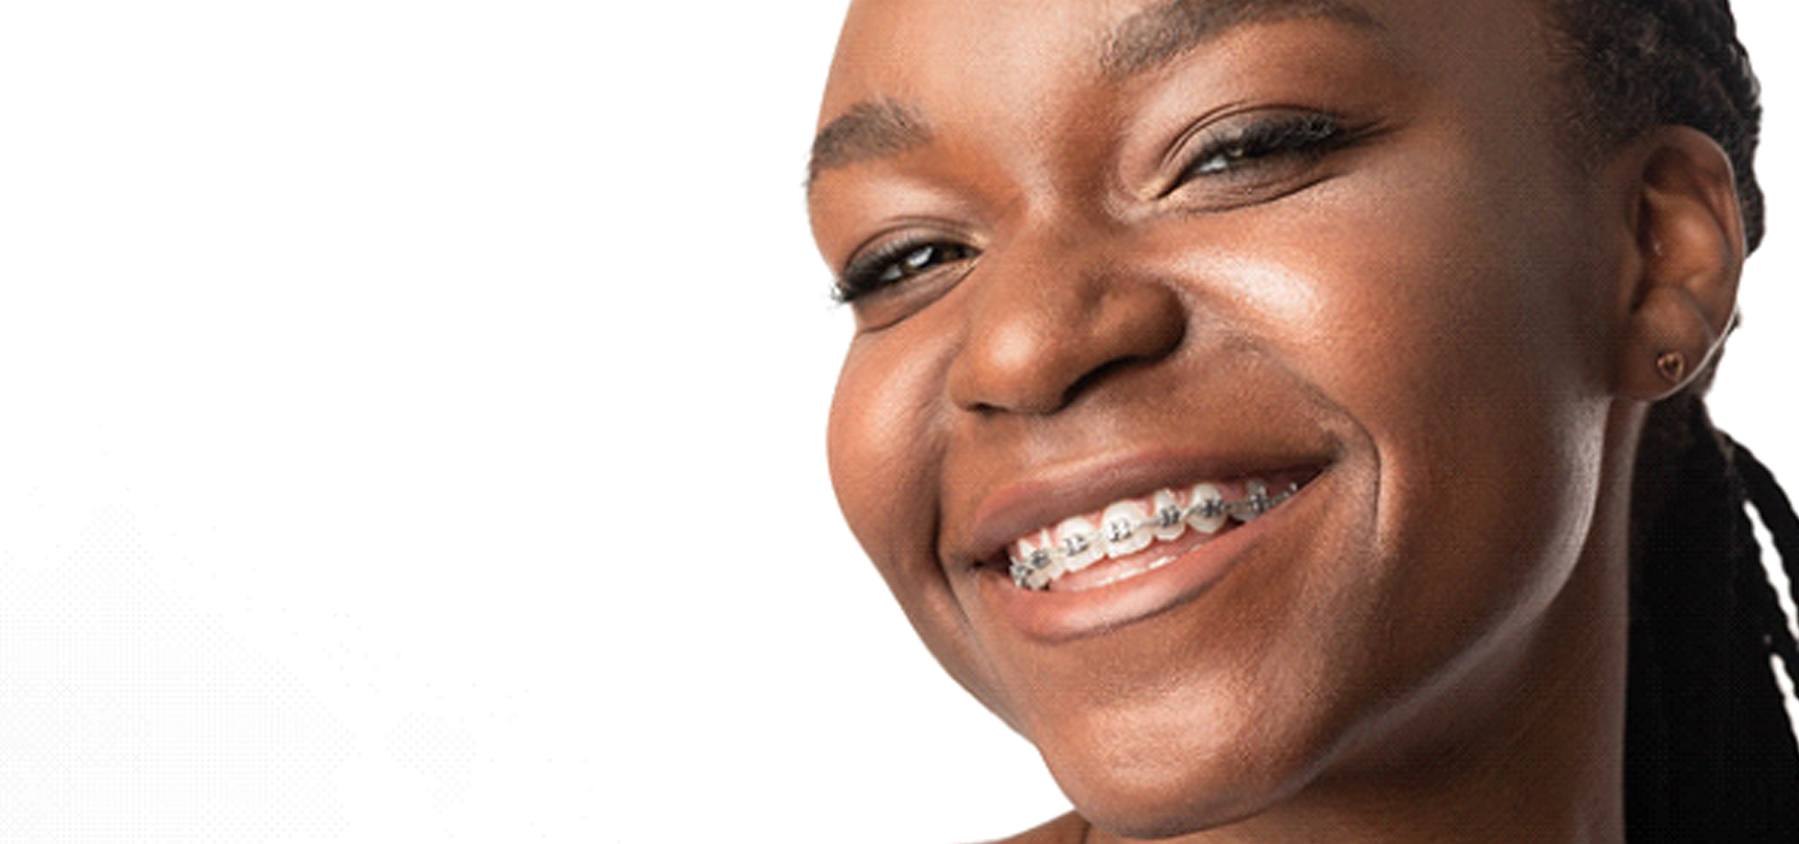 Smiling girl with metal braces in Frisco on white background